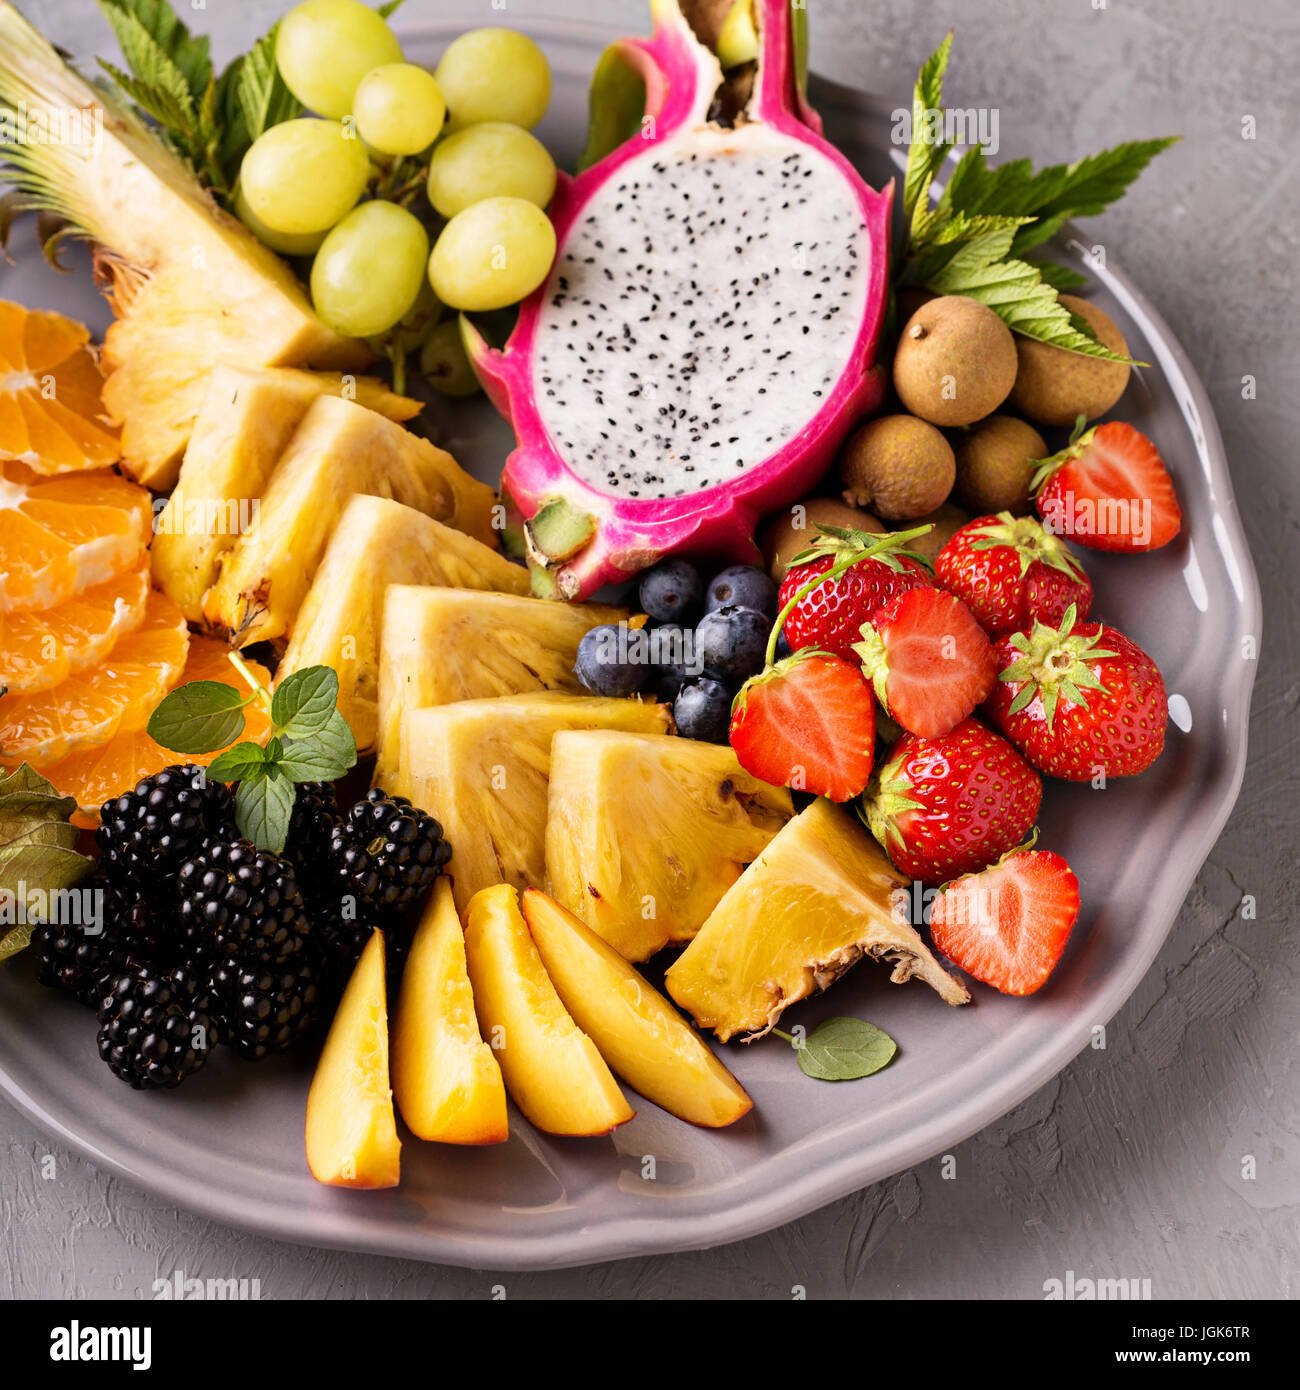 Exotic fruits on a tray Stock Photo